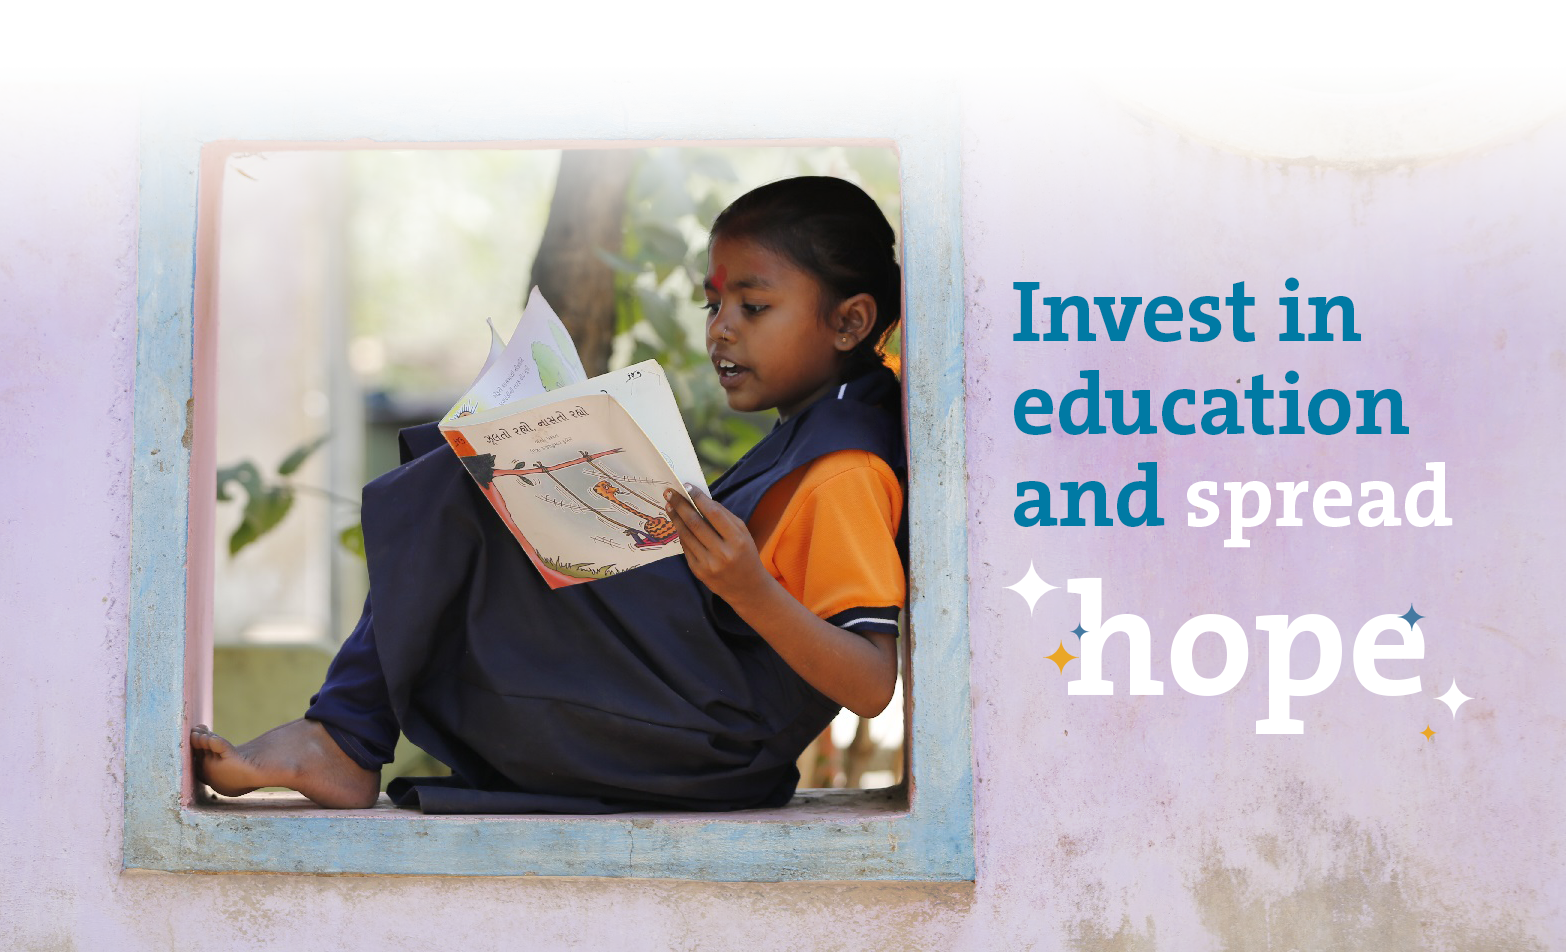 Invest in education and spread hope